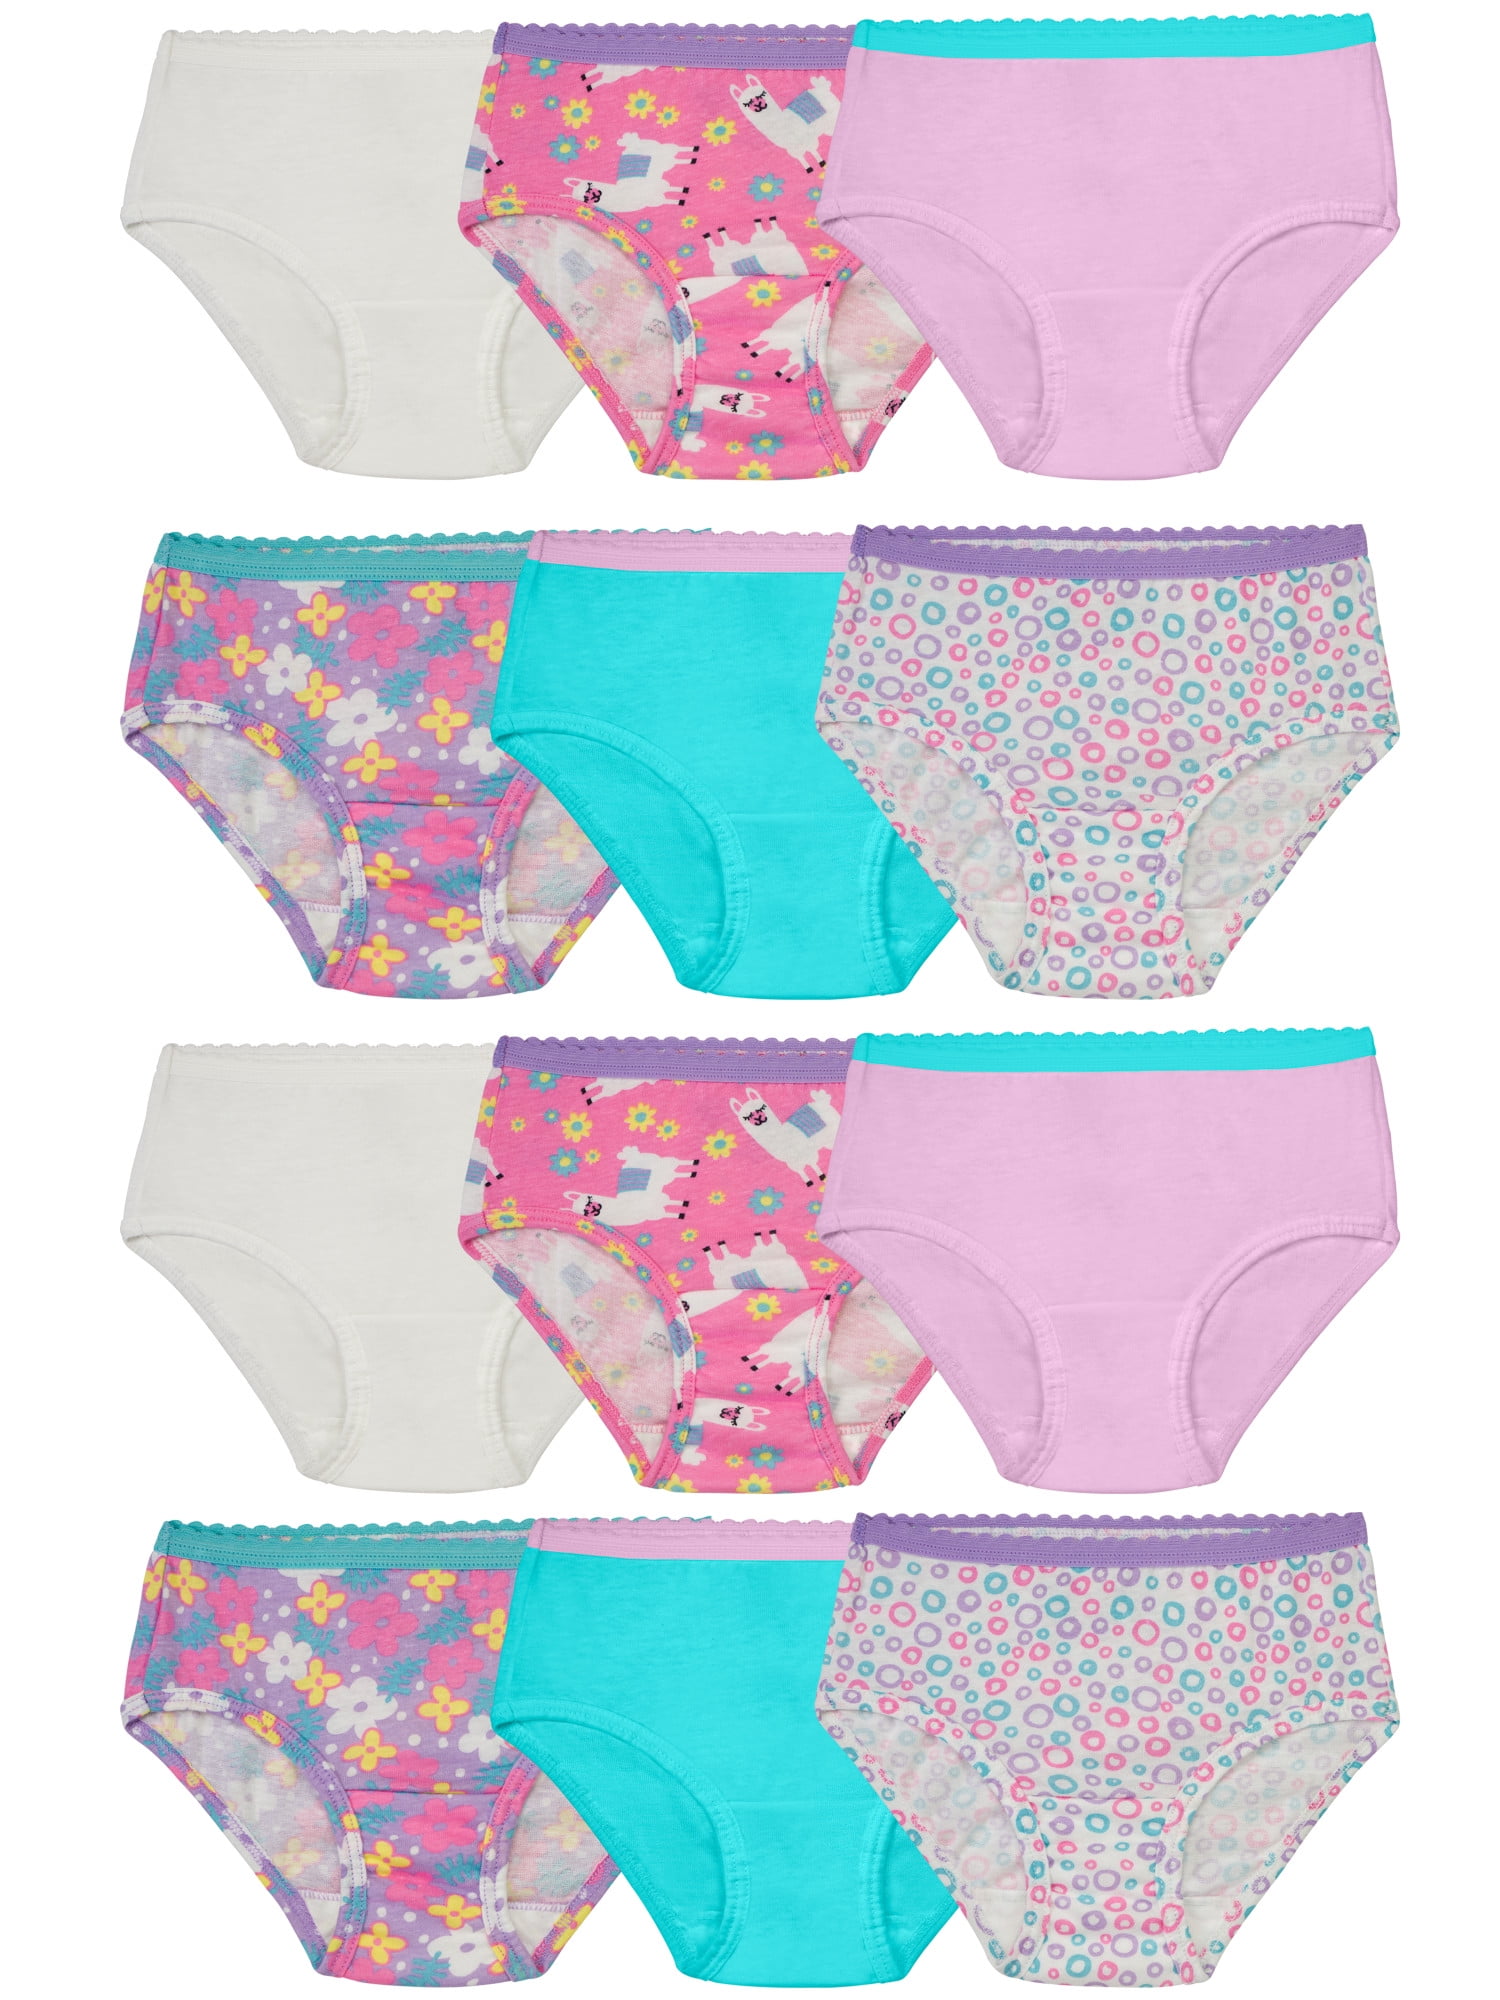 Buy Fruit of the Loom Toddler Girls 10 Pack Assorted Cotton Brief Underwear,  4T/5T, at